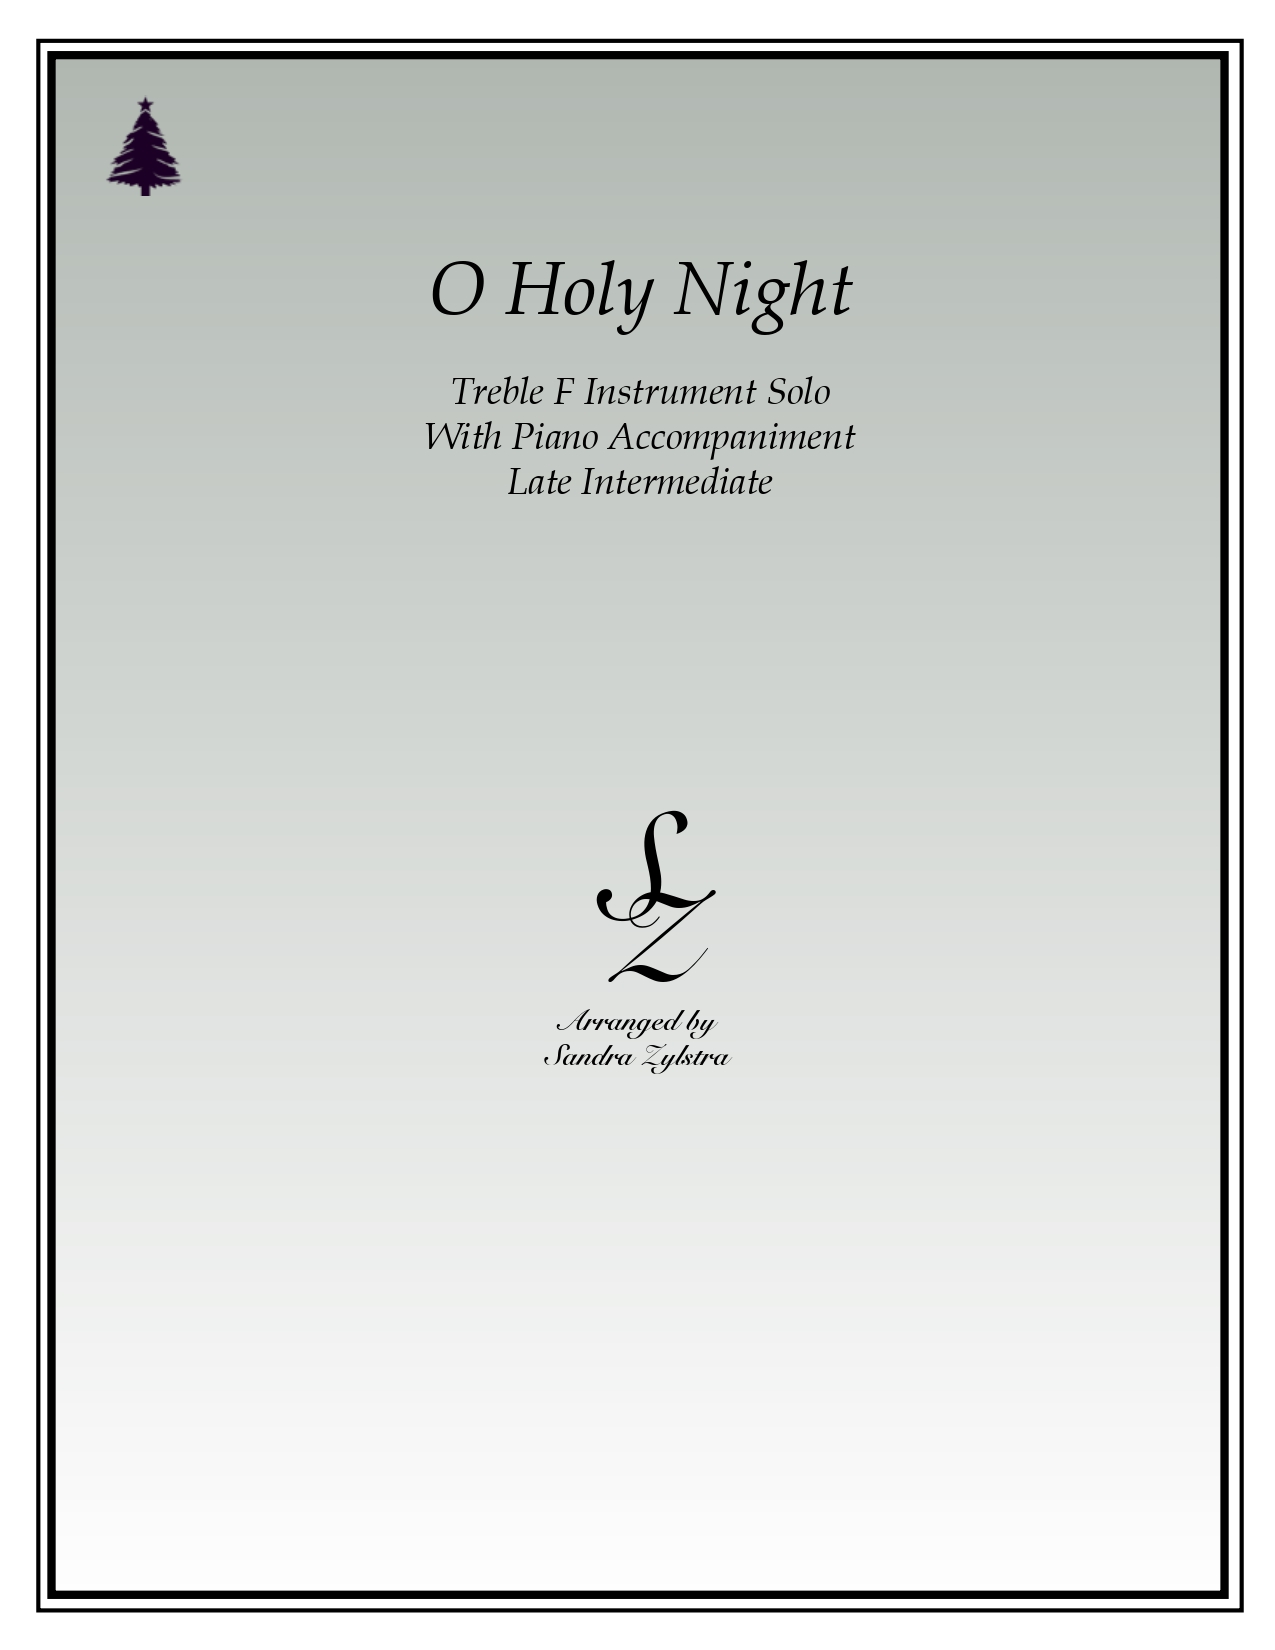 O Holy Night F instrument solo part cover page 00011